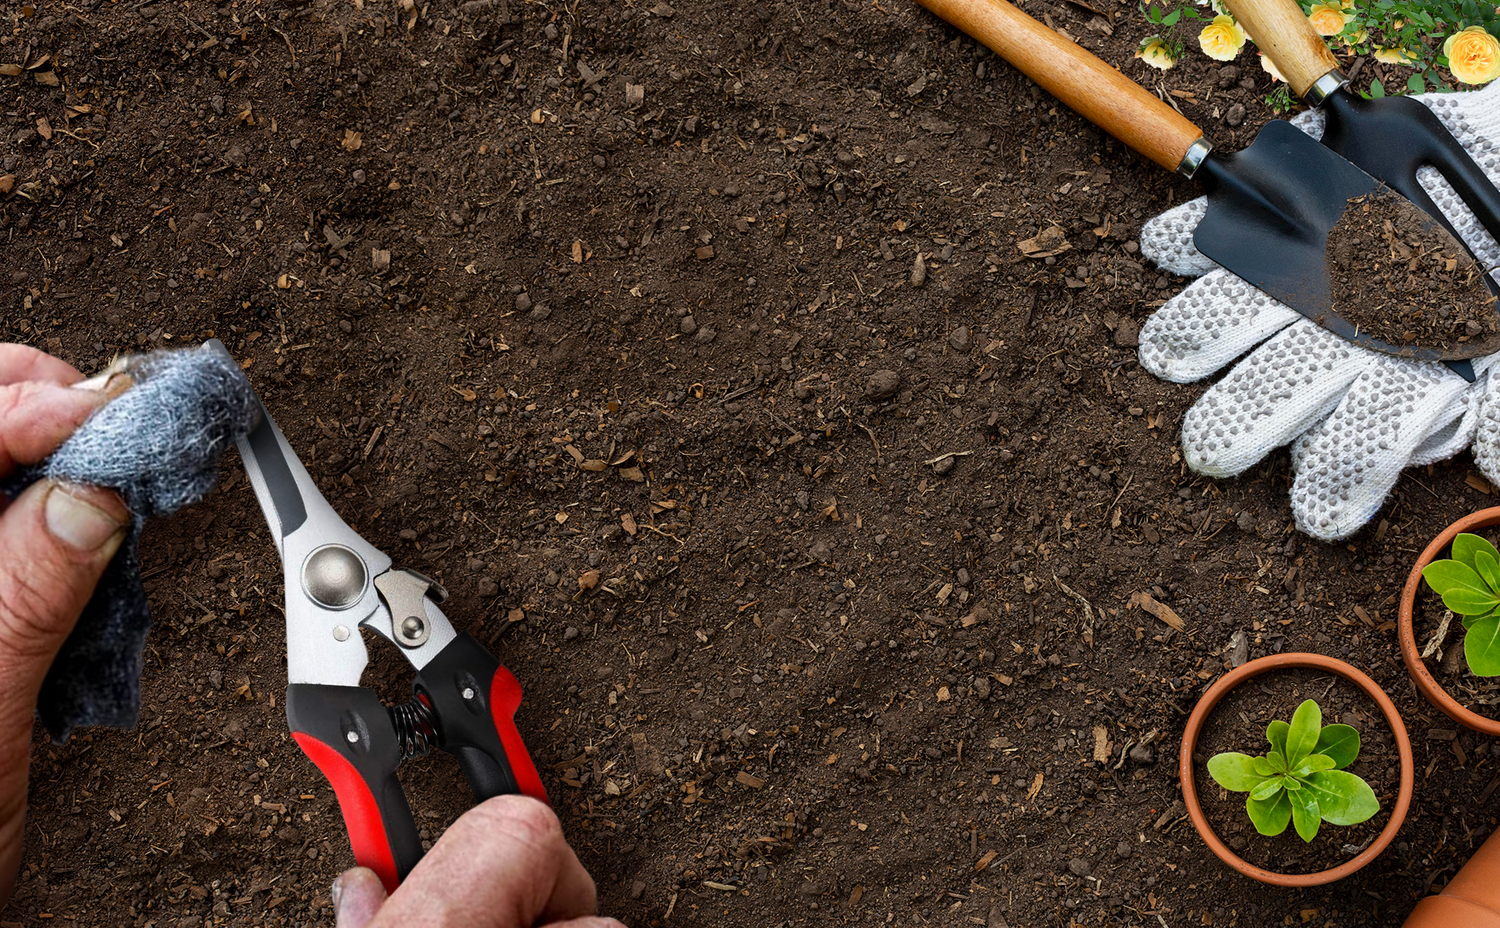 Gardening tools - Pruning Snips designed for easy cleaning